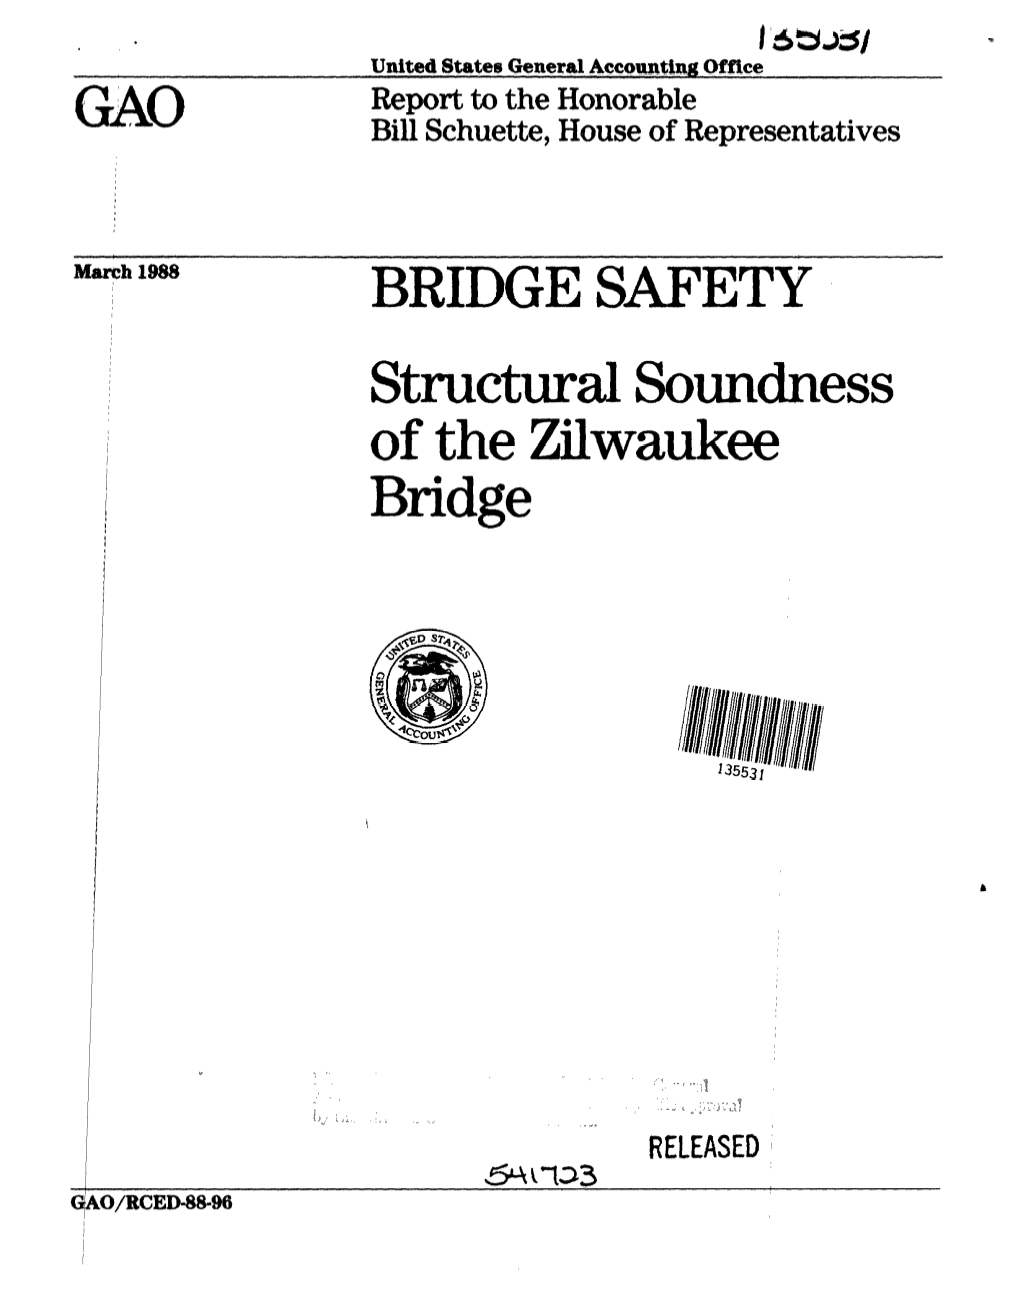 Structural Soundness of the Zilwaukee Bridge